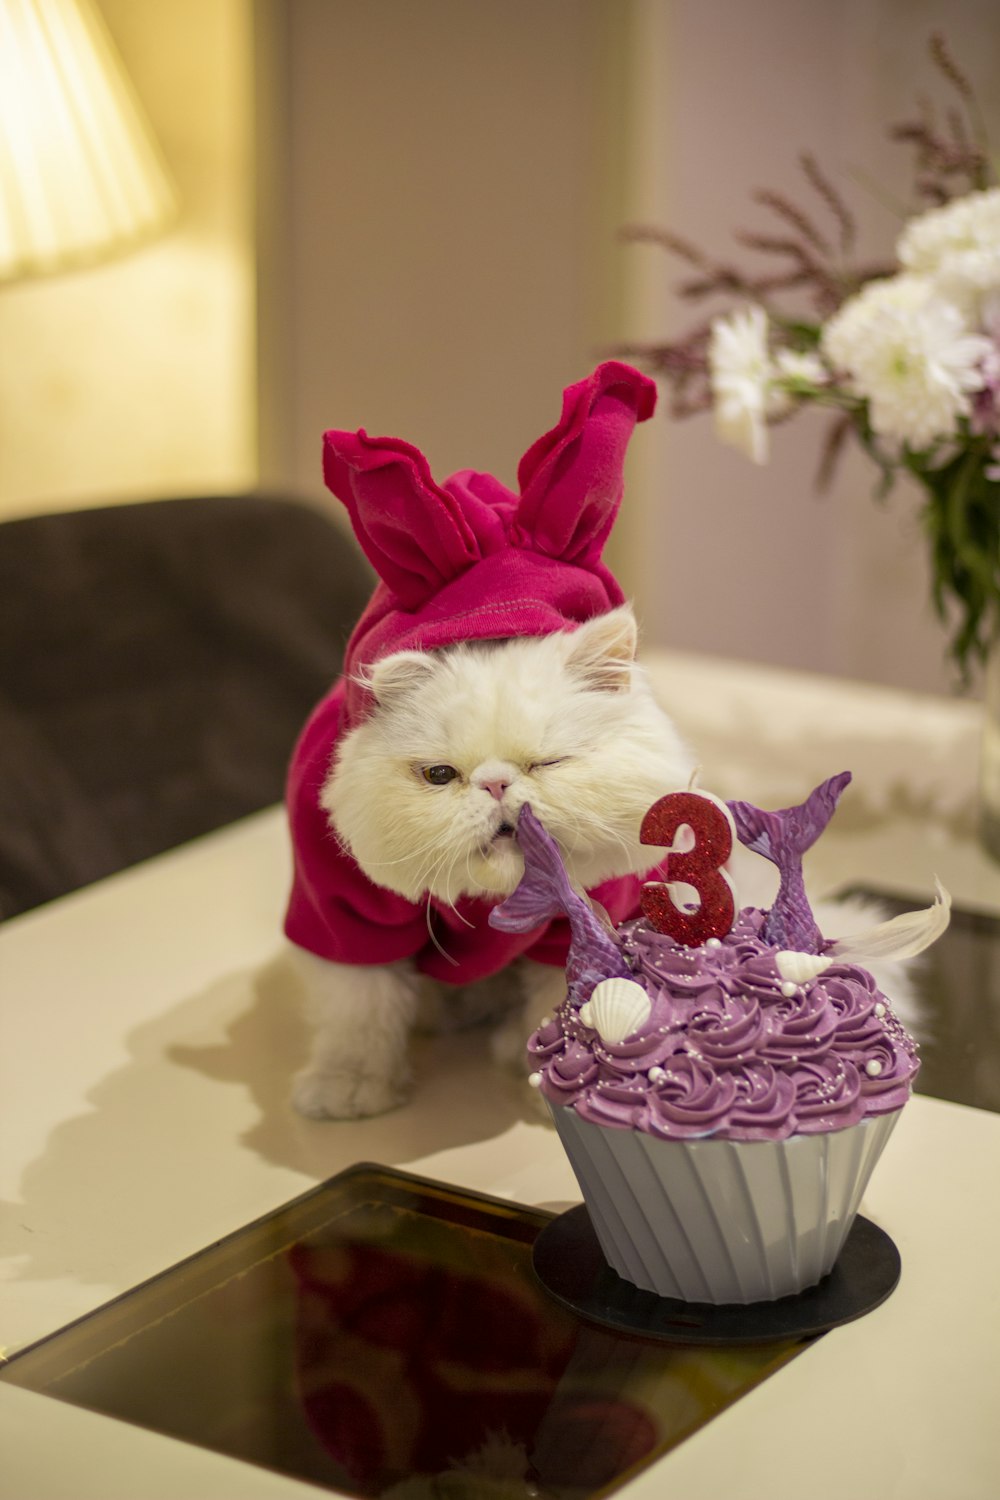 a white cat wearing a pink bunny outfit next to a cupcake